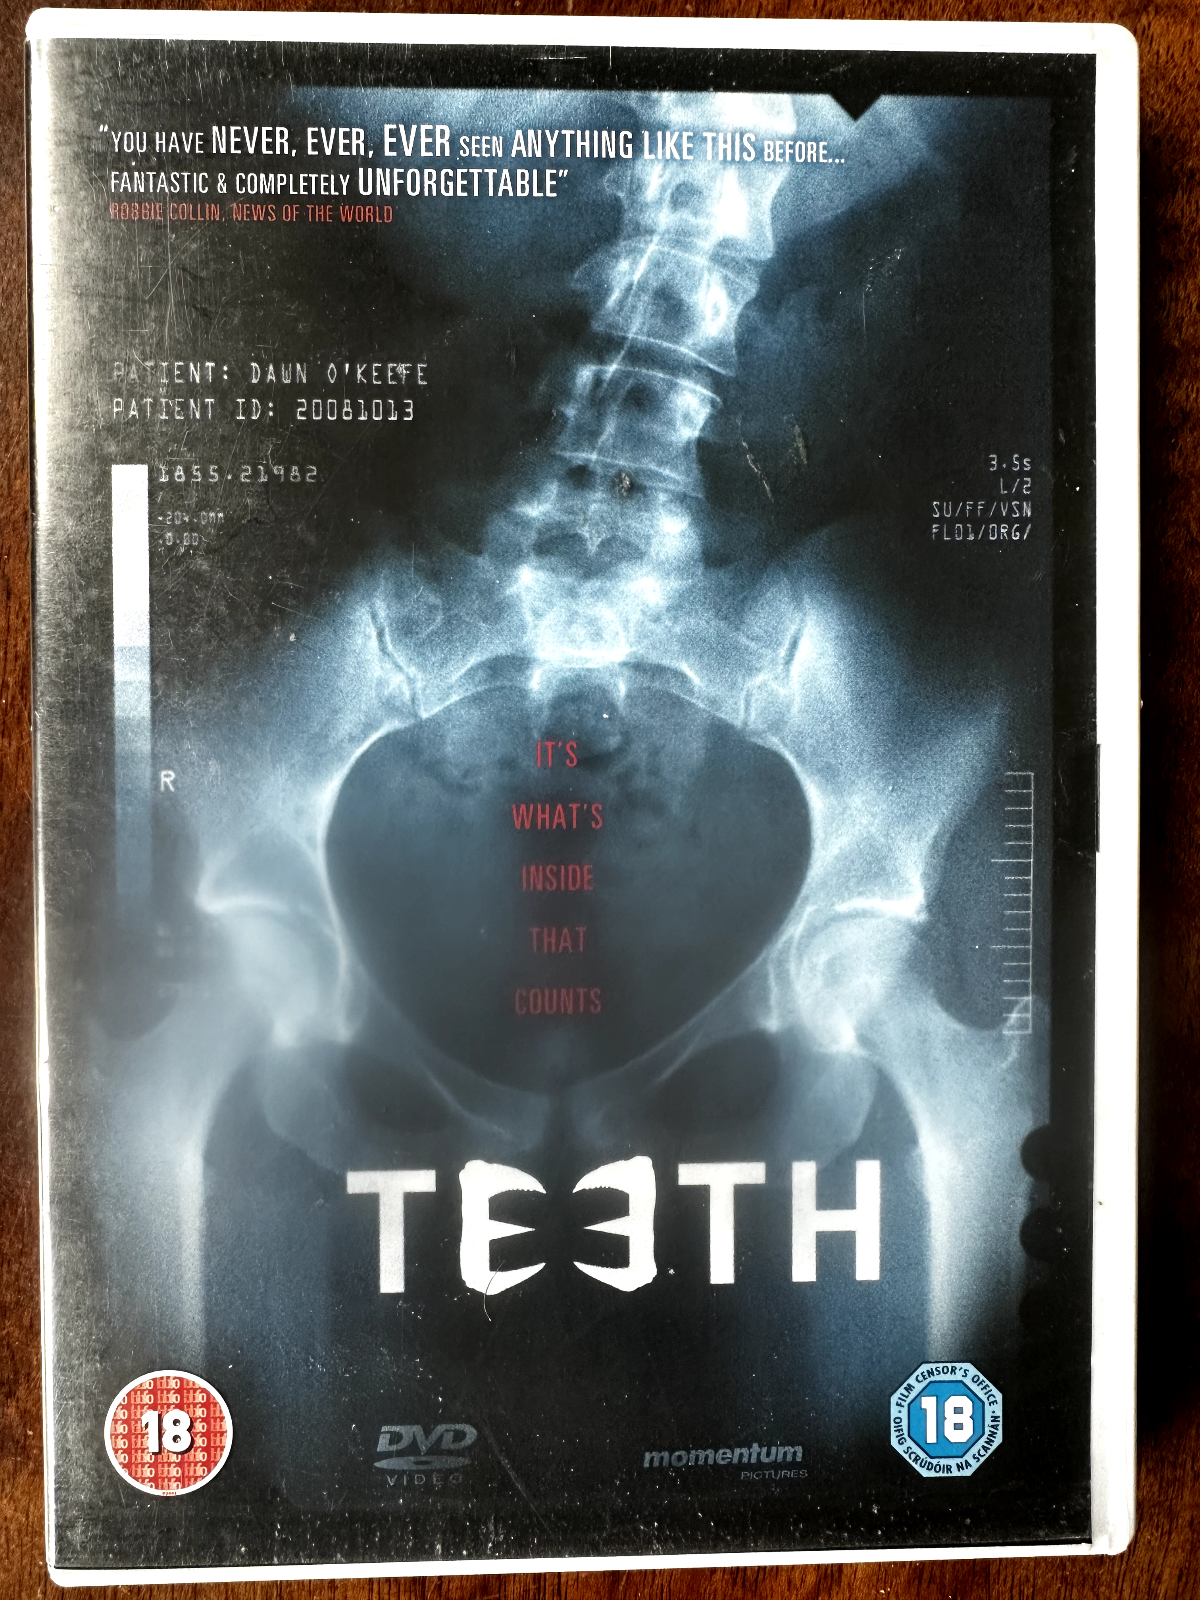 aimee lynn bailey recommends Teeth Movie Free Download